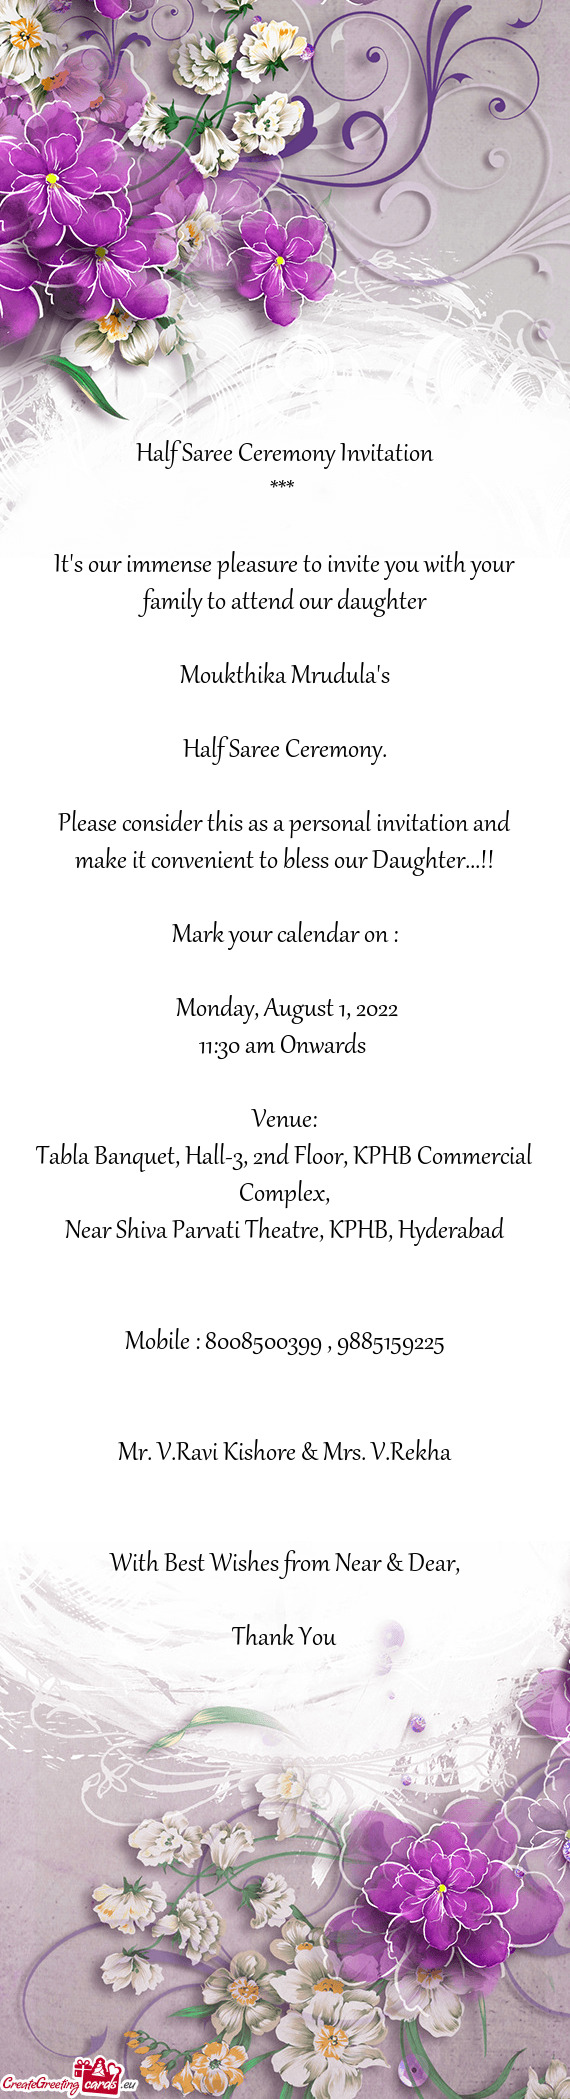 Please consider this as a personal invitation and make it convenient to bless our Daughter